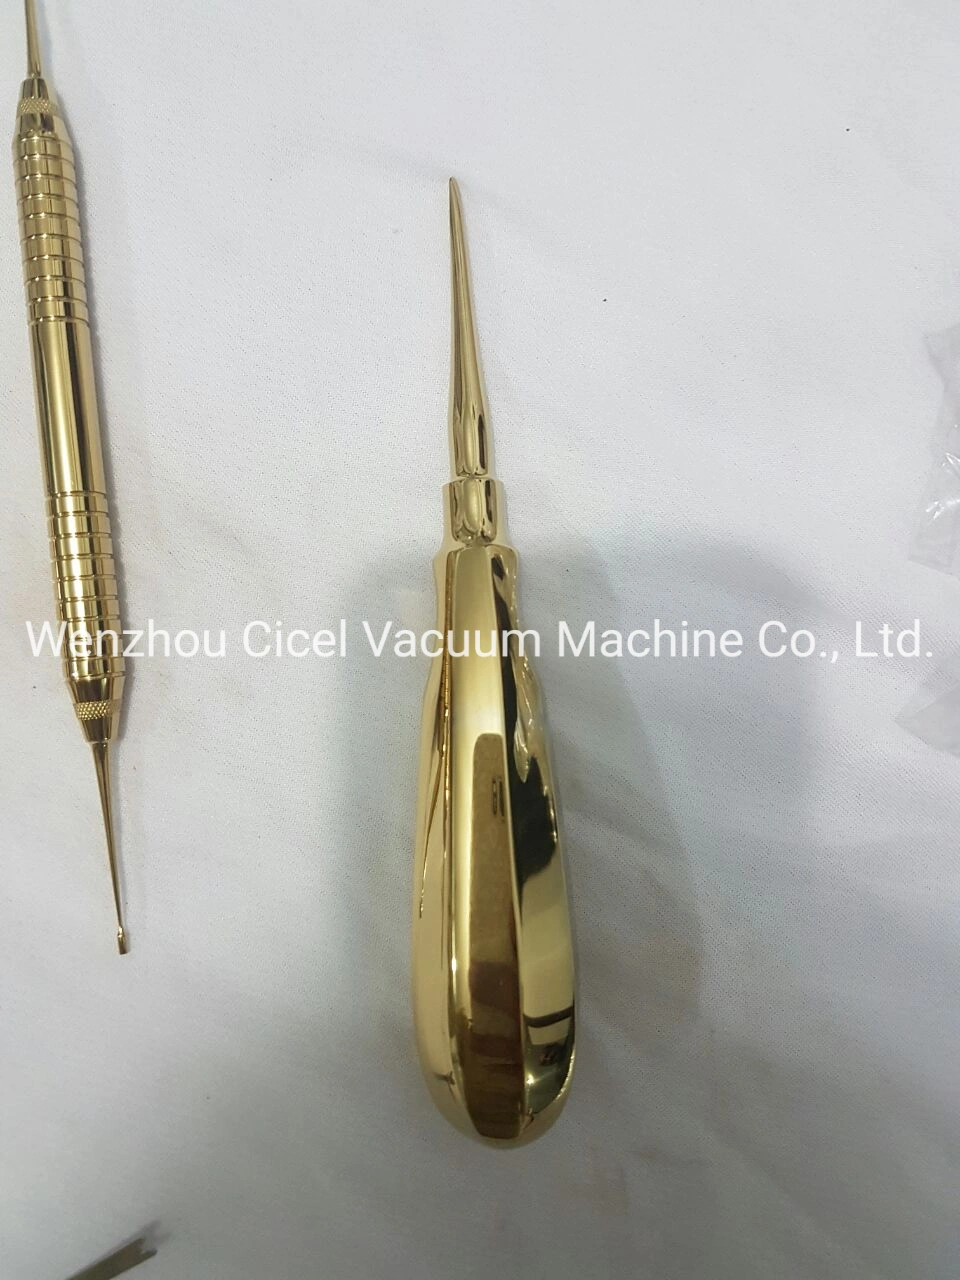 Surgical Parts Vacuum Coating Equipment/Surgical Scissors PVD Coating System